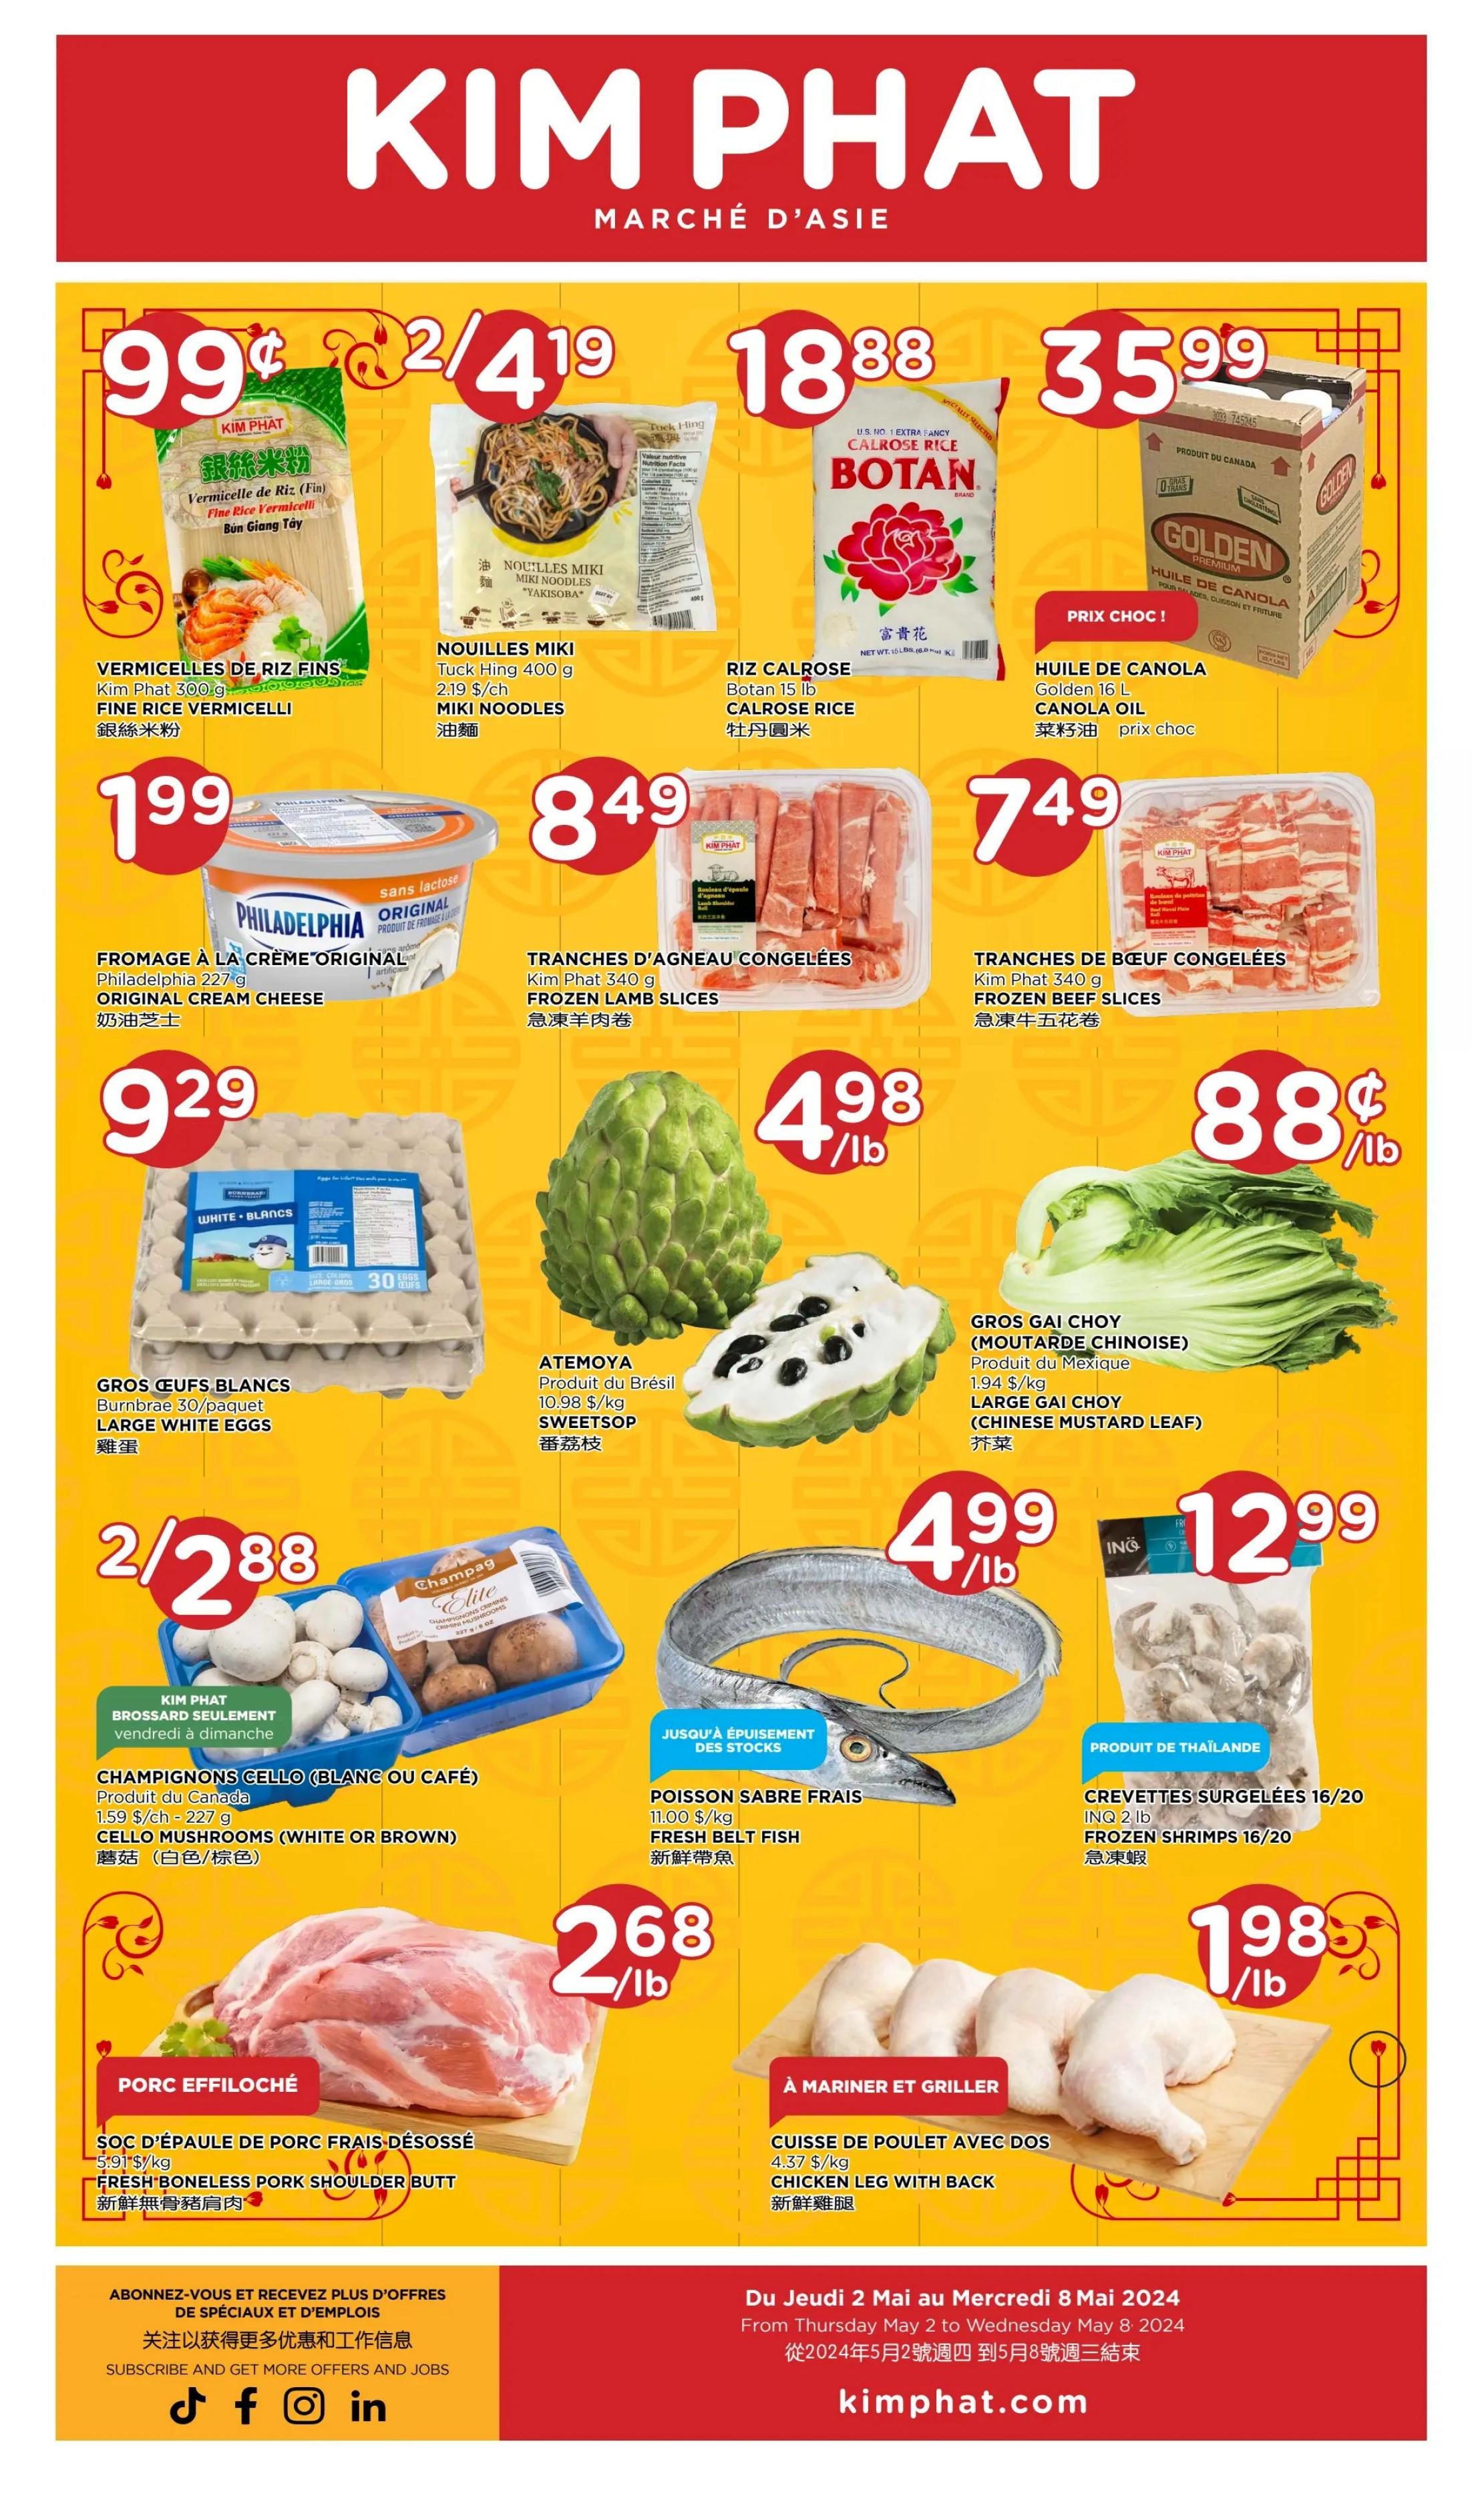 Kim Phat - Weekly Flyer Specials